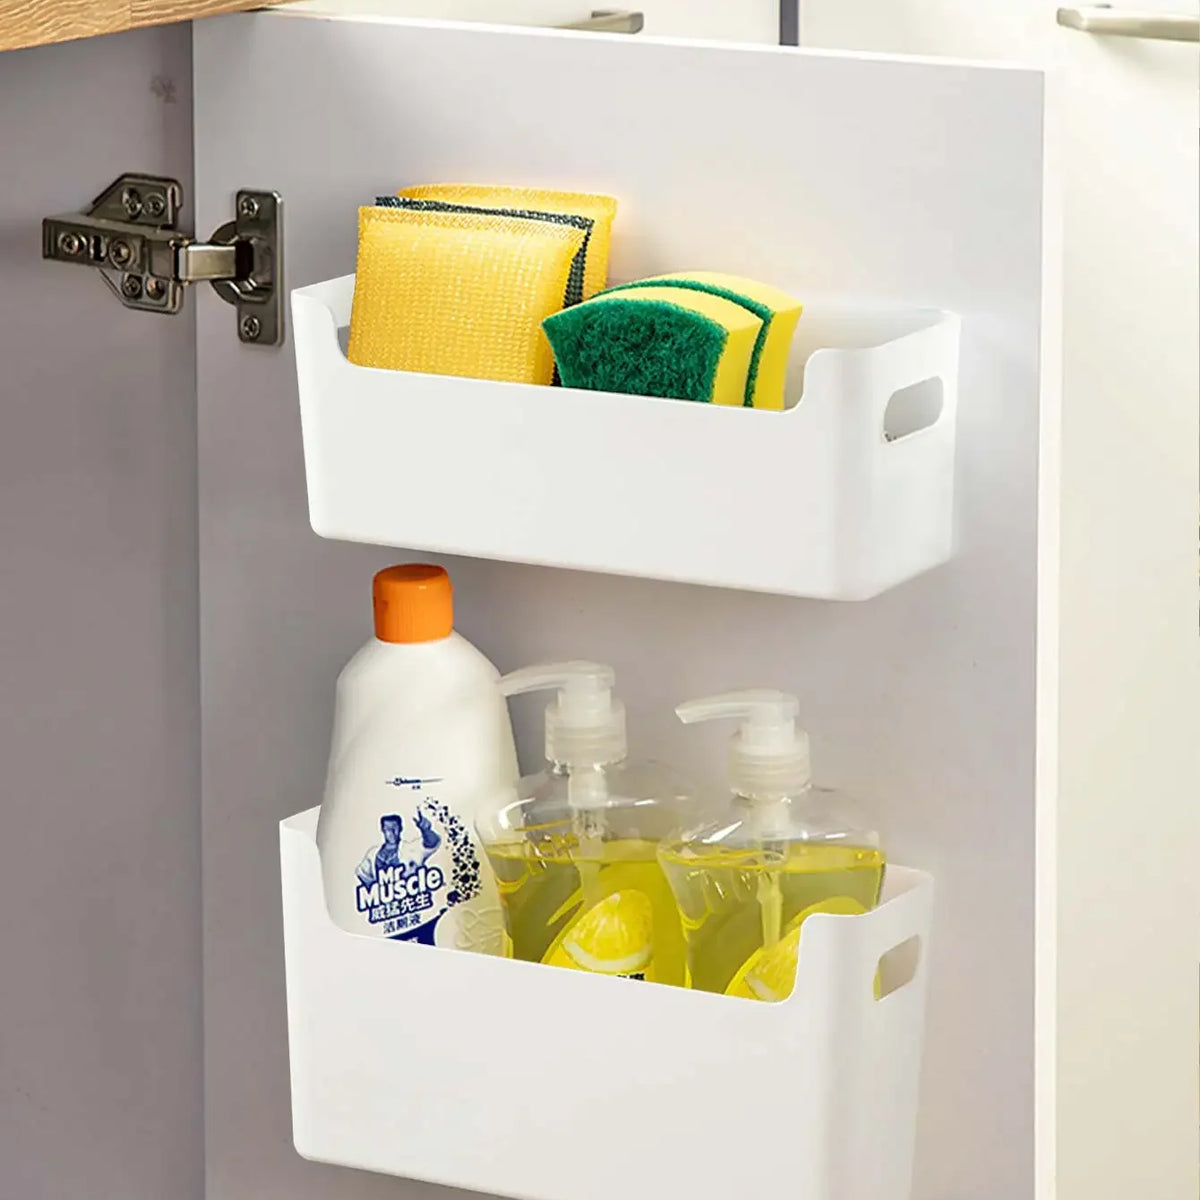 Wall-Mounted Cabinet Storage Box for a Neat